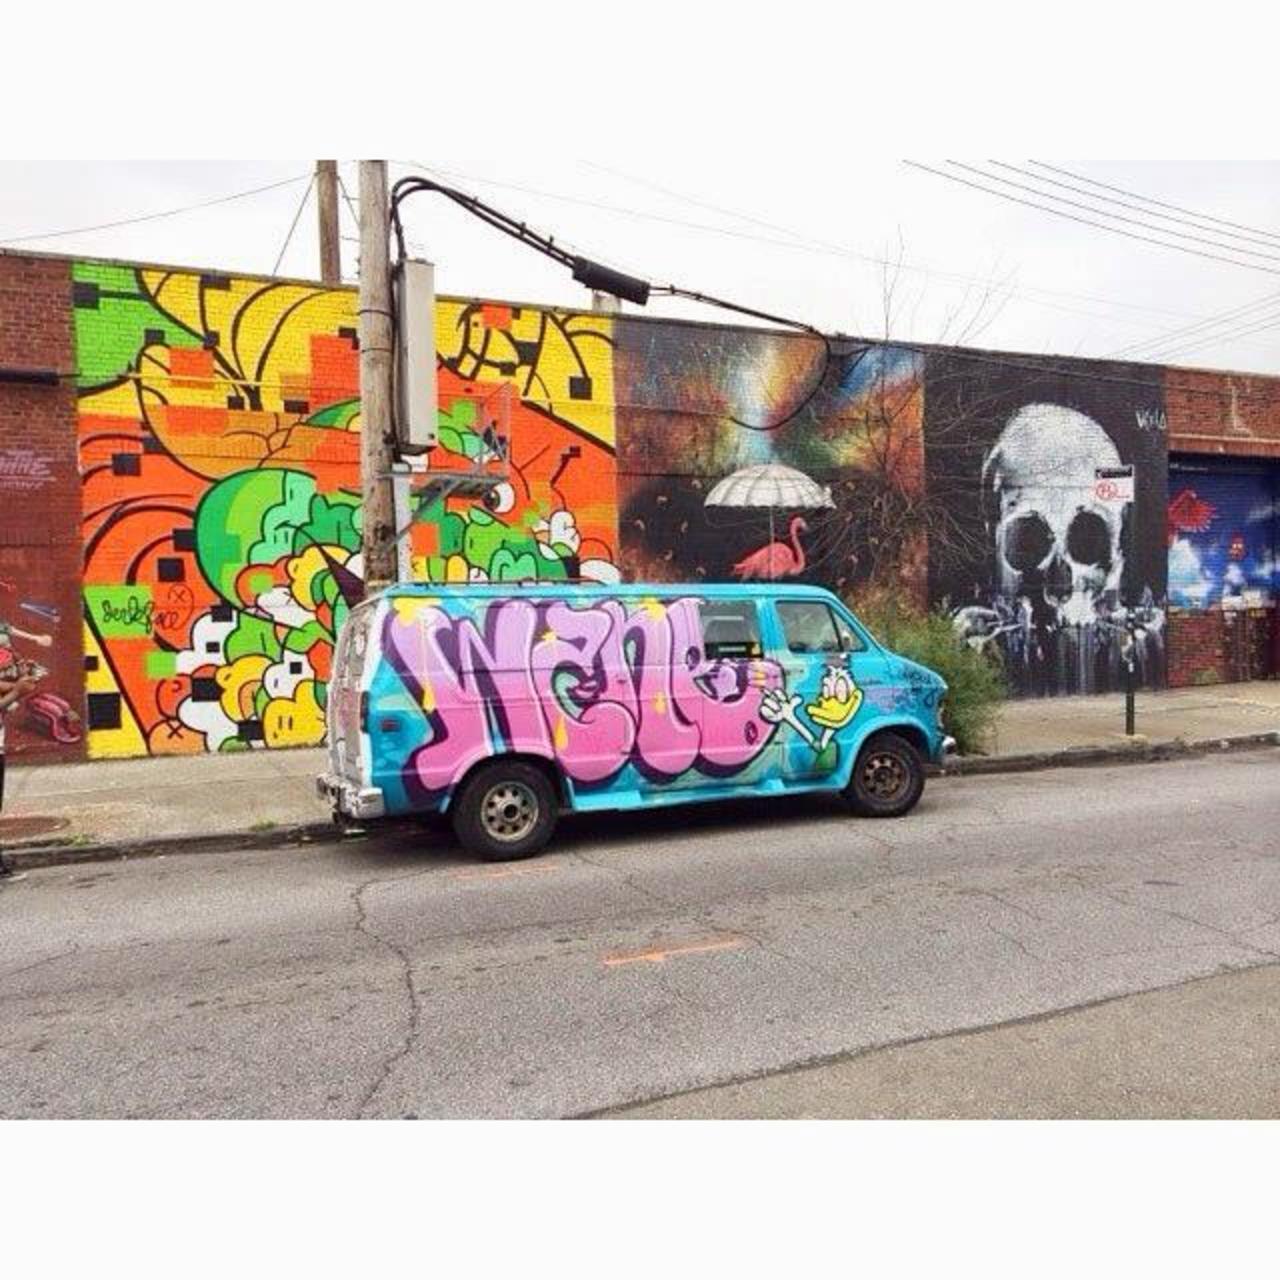 I saw this van in #brooklyn . Does anyone know of the #artist ? #streetart #graffiti http://t.co/D0OVEMbdQ4